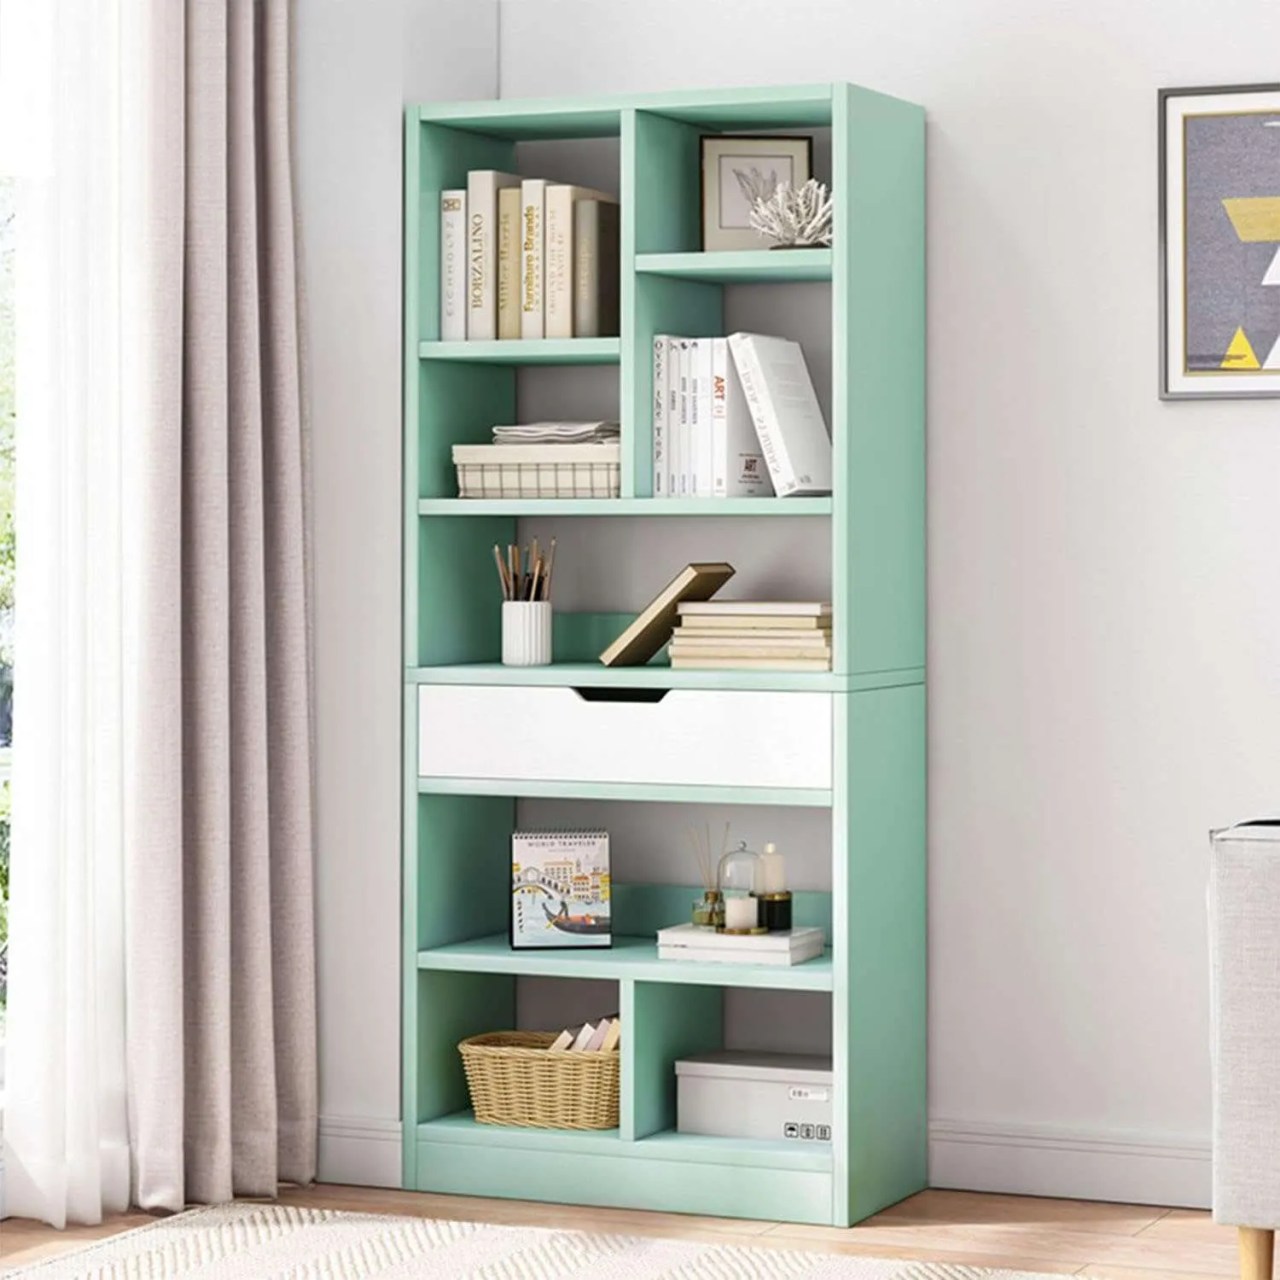 a mint green bookcase with shelf in the middle